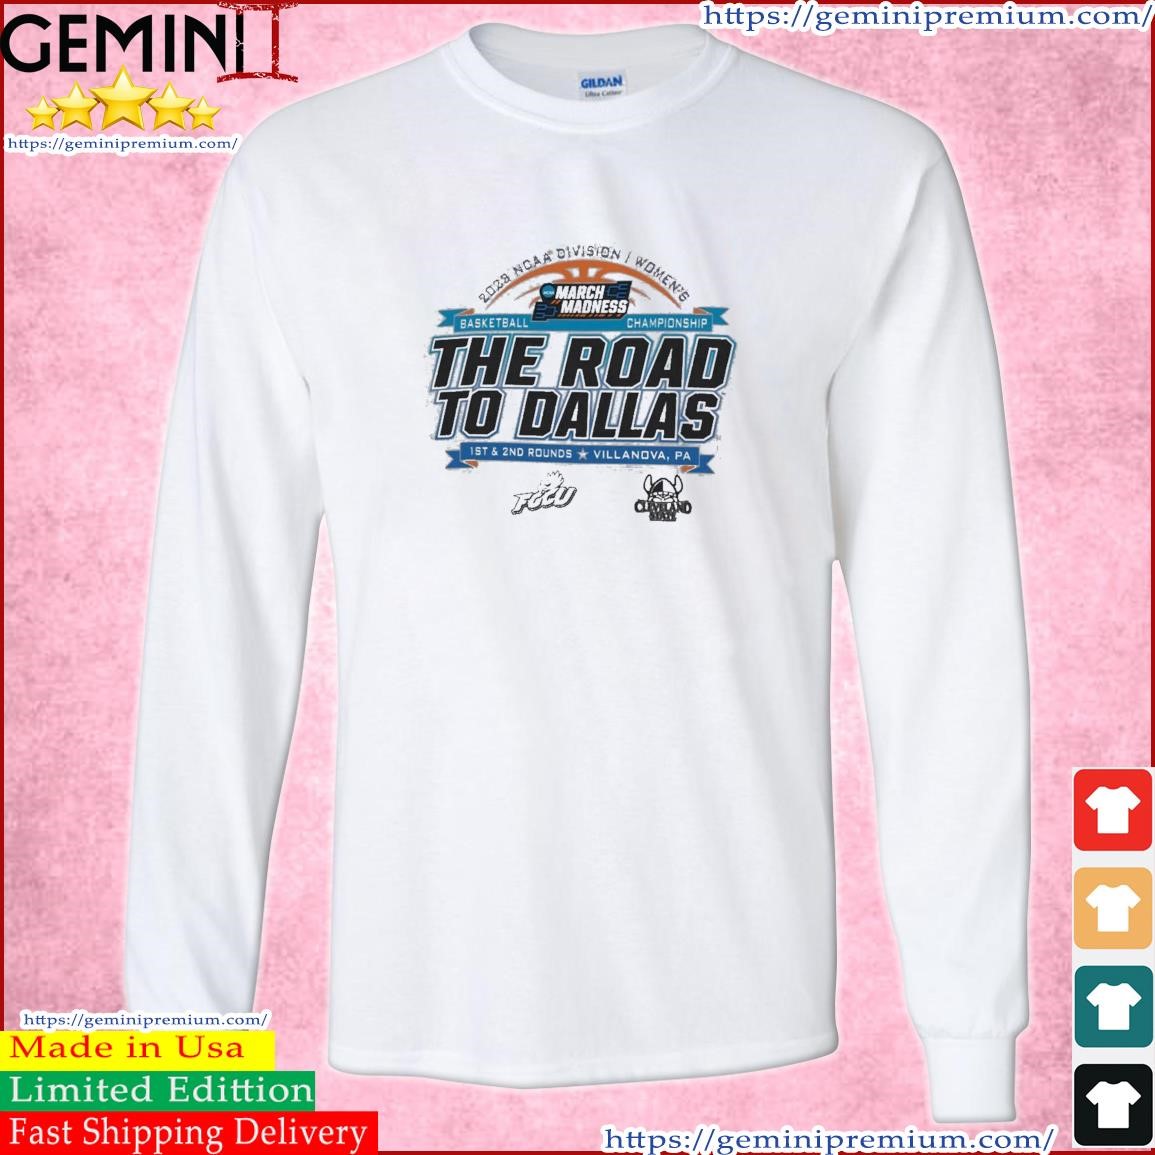 2023 NCAA Division I Women's Basketball The Road To Dallas March Madness 1st & 2nd Rounds Villanova, PA Shirt Long Sleeve Tee.jpg